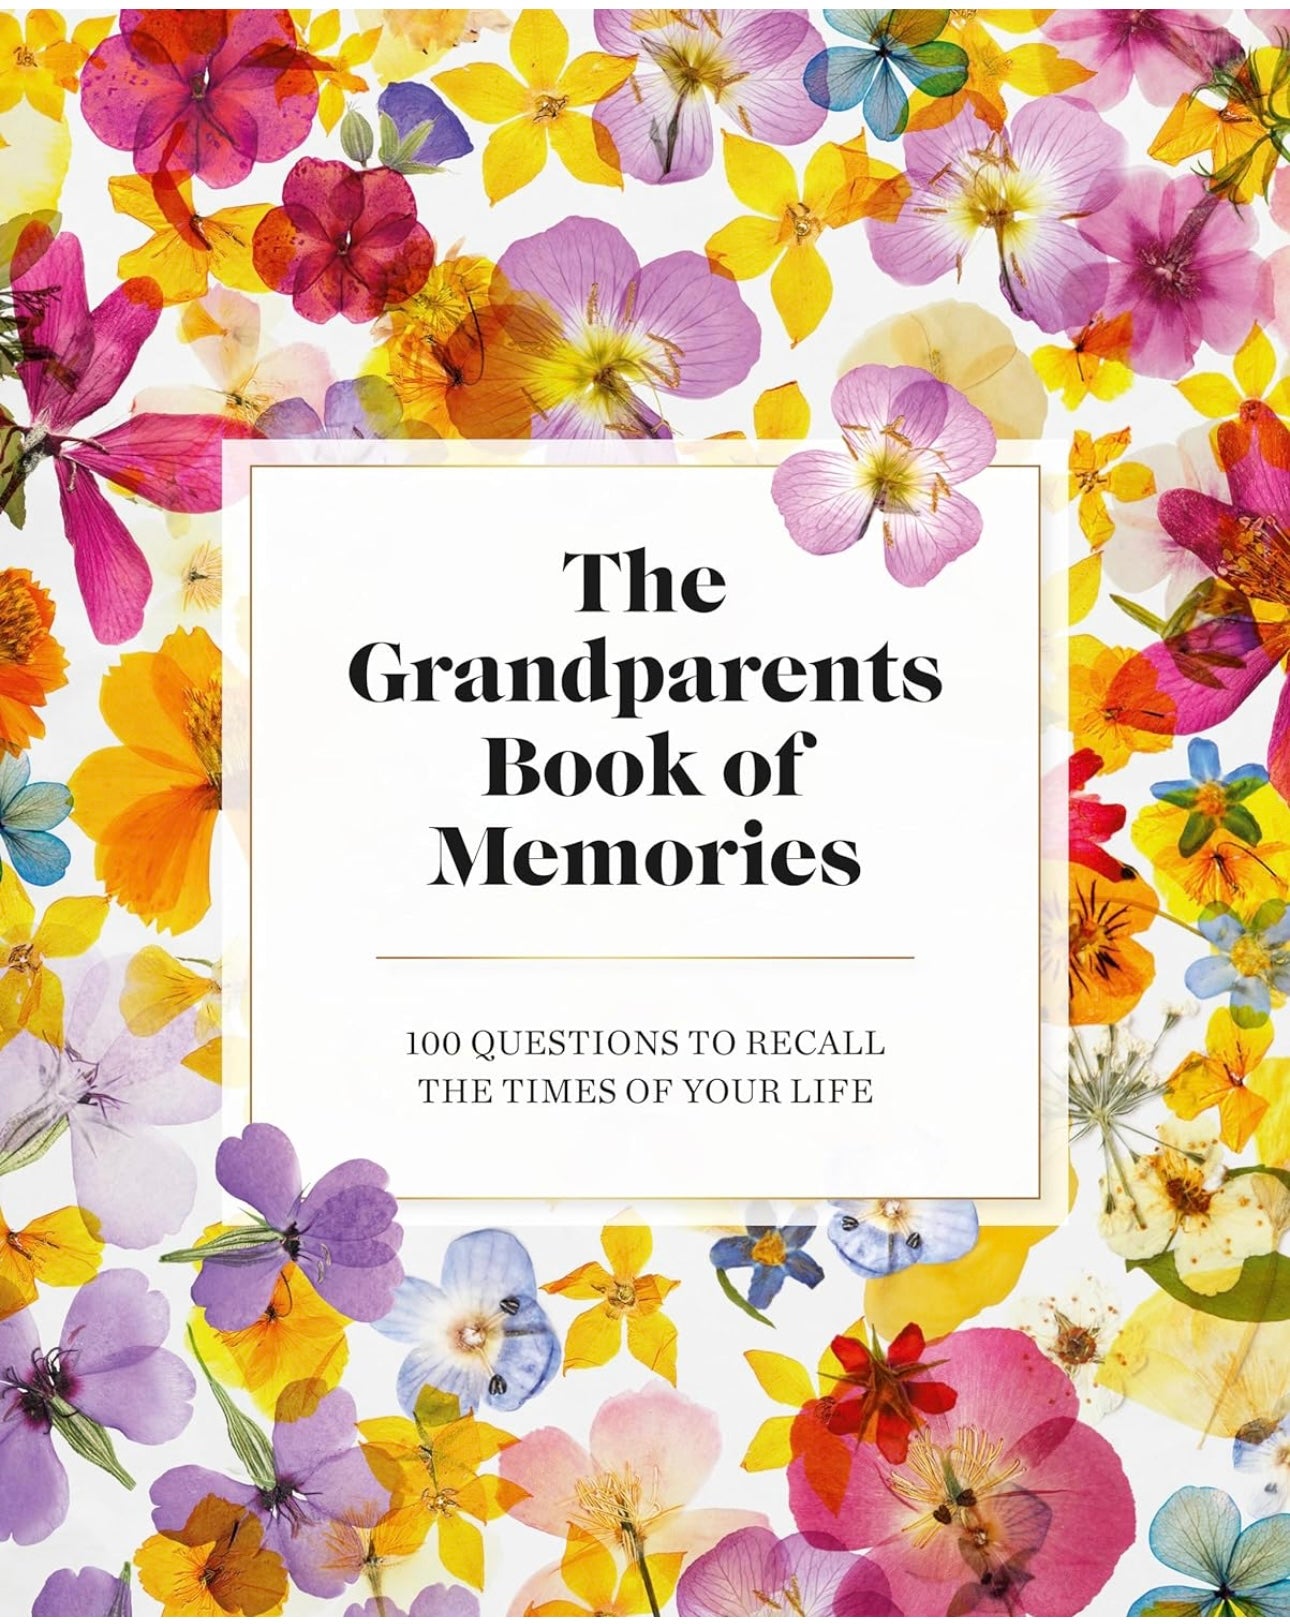 The Grandparents Book of Memories: 100 Questions to Recall the Times of Your Life hardcover